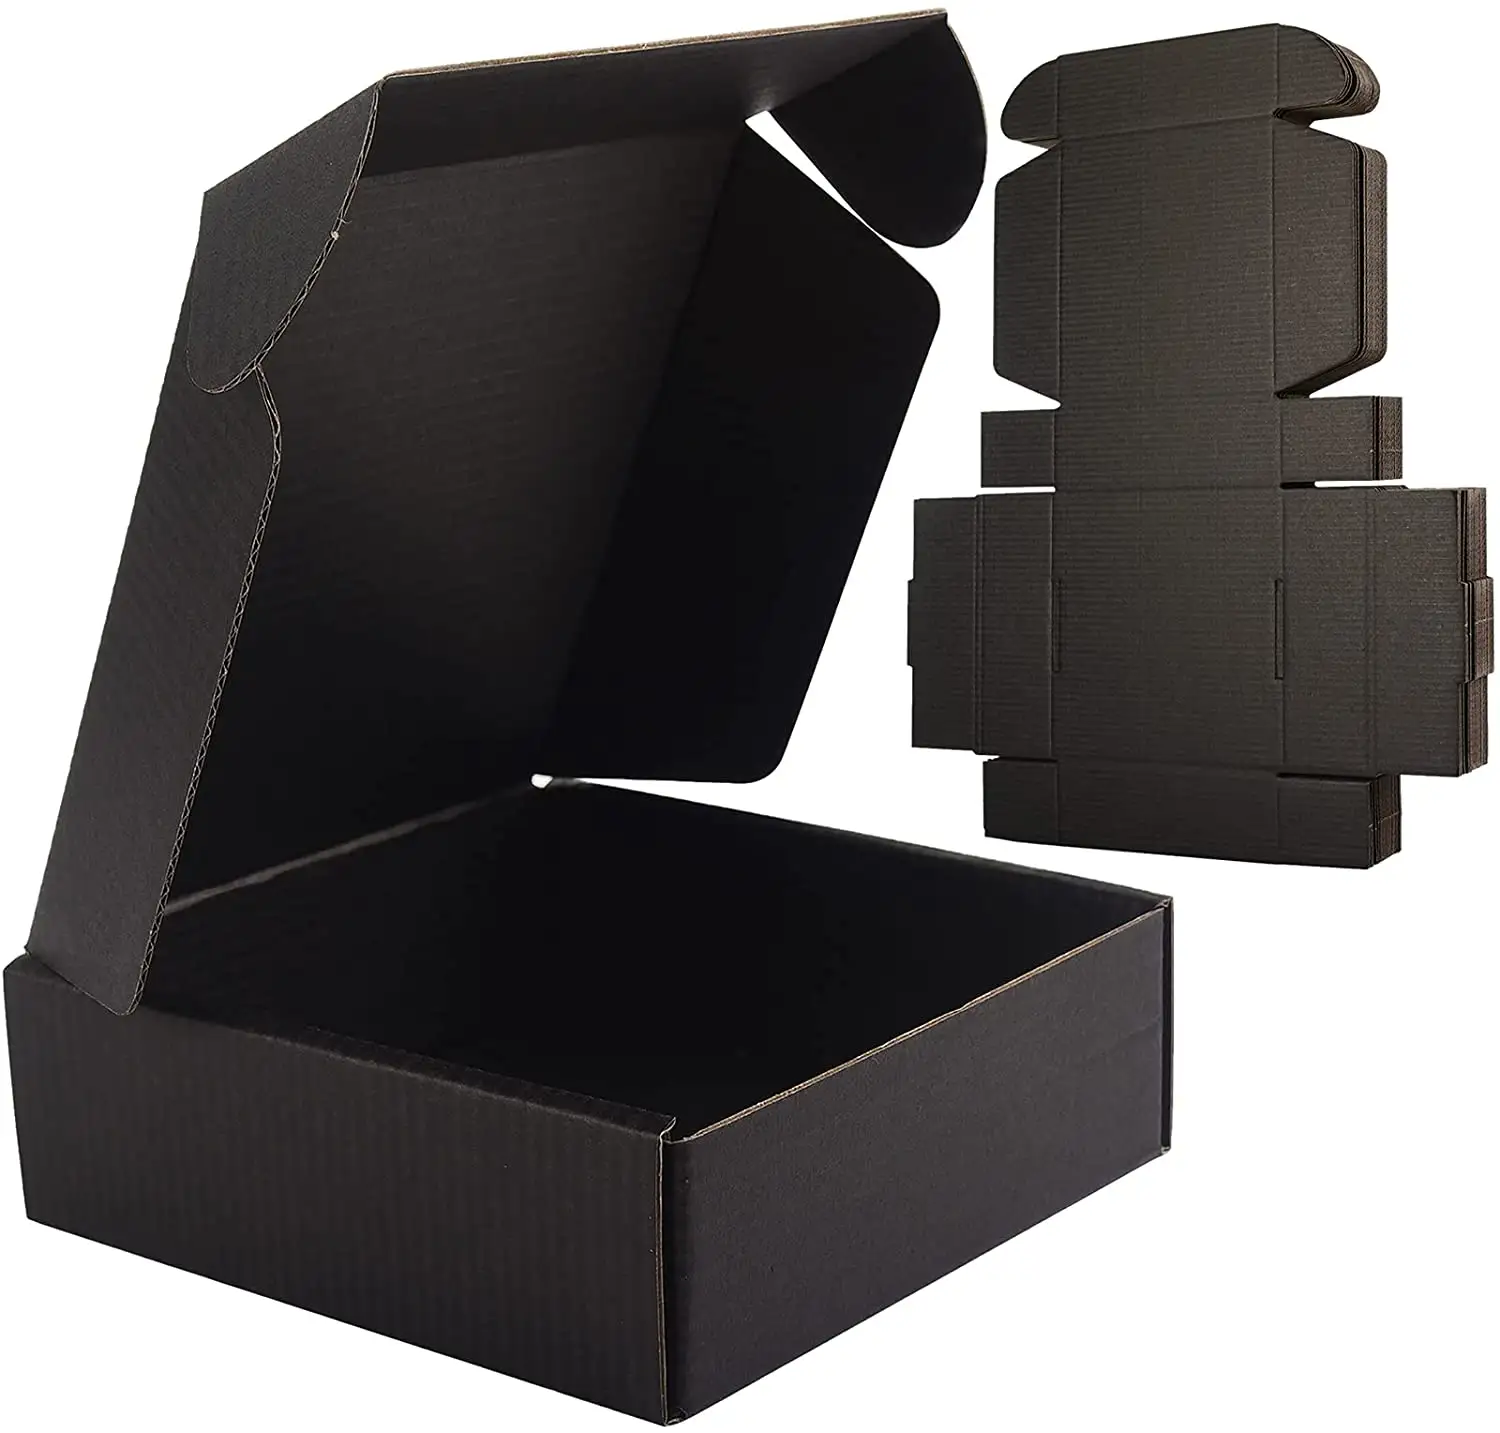 Small Black Shipping Box for Small Business Pack ofCardboard Corrugated Mailbox for Shipping Packaging black die cut box